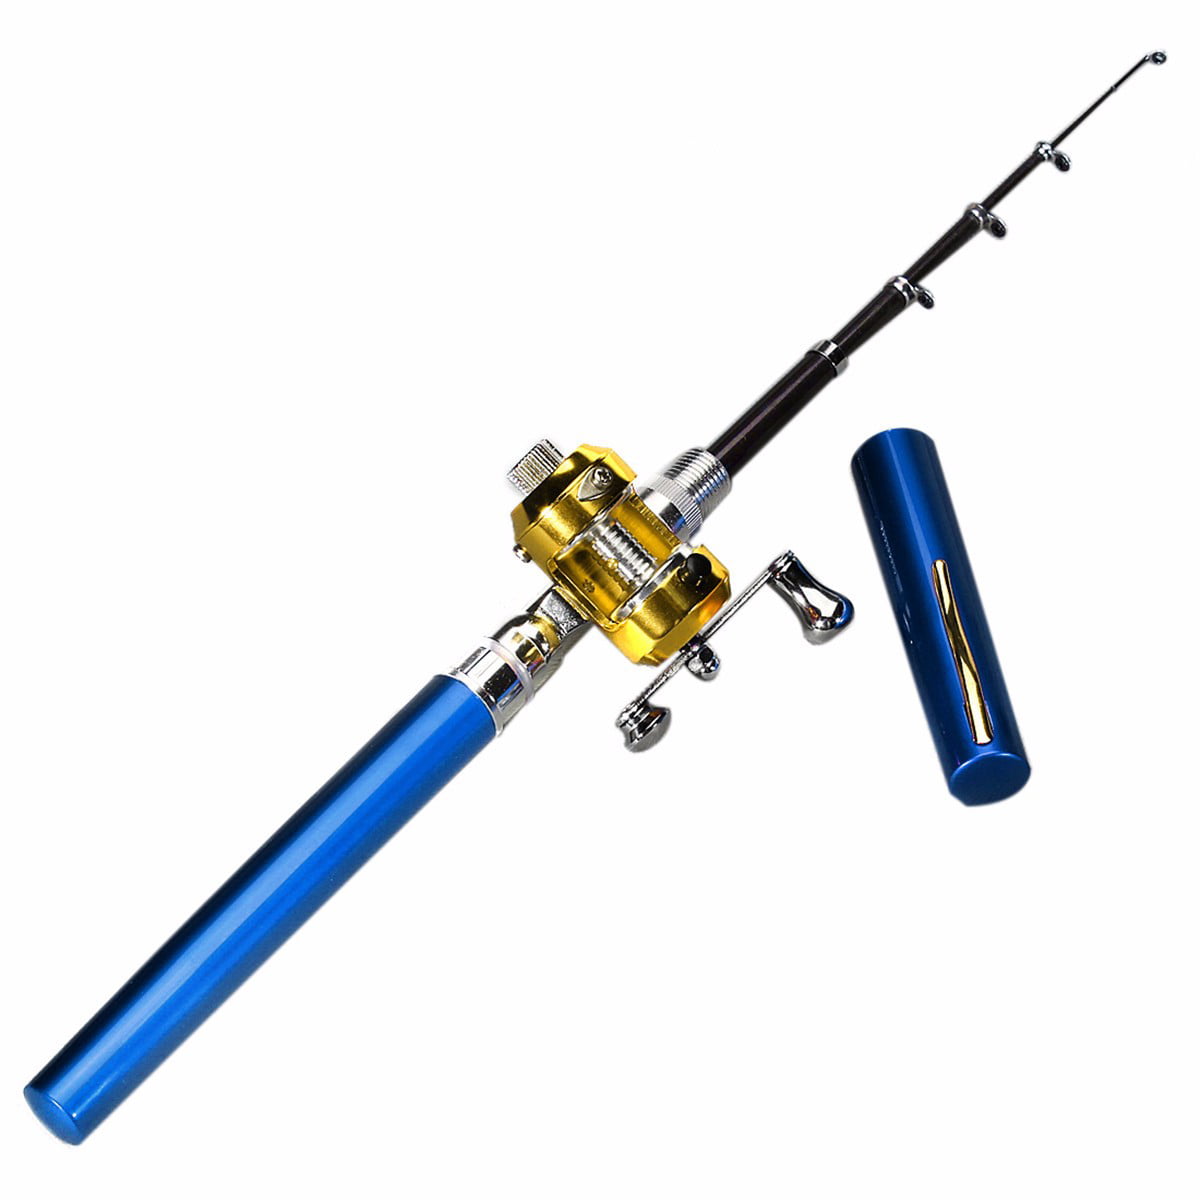 Details about   Mini Fishing Tackle Pocket Pen Kit Rod Pole and Spin Reel Combos Wheel Tool I0B5 